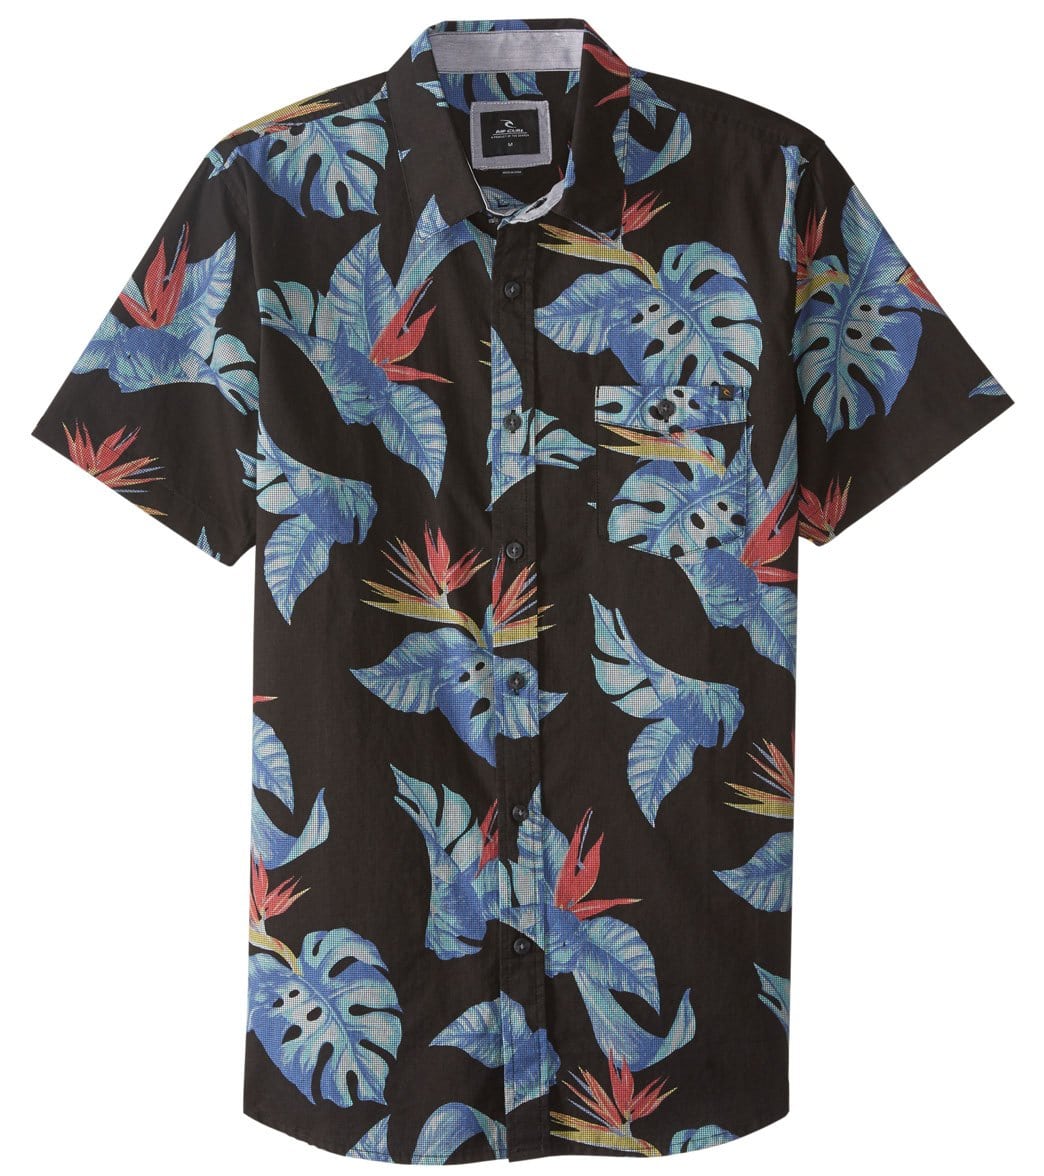 Rip Curl Men's Sessions Short Sleeve Shirt at SwimOutlet.com - Free ...